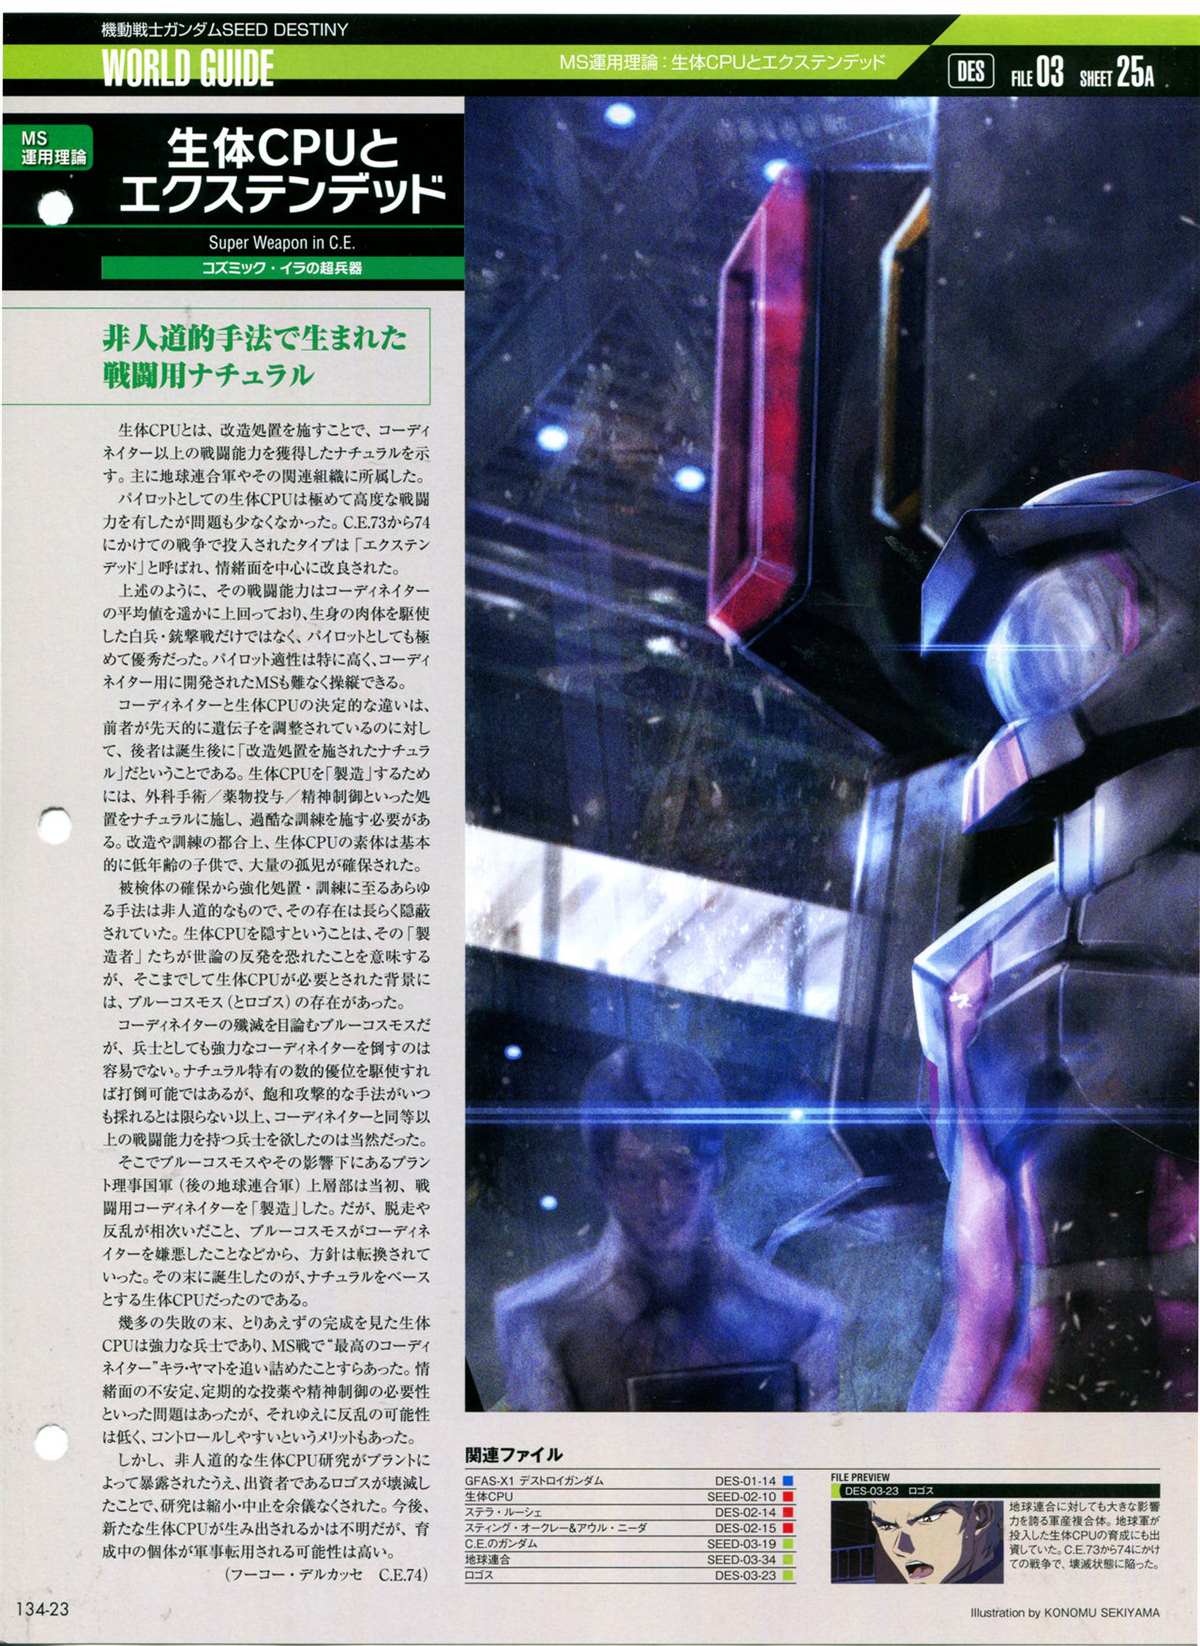 The Official Gundam Perfect File  - 第134話 - 3